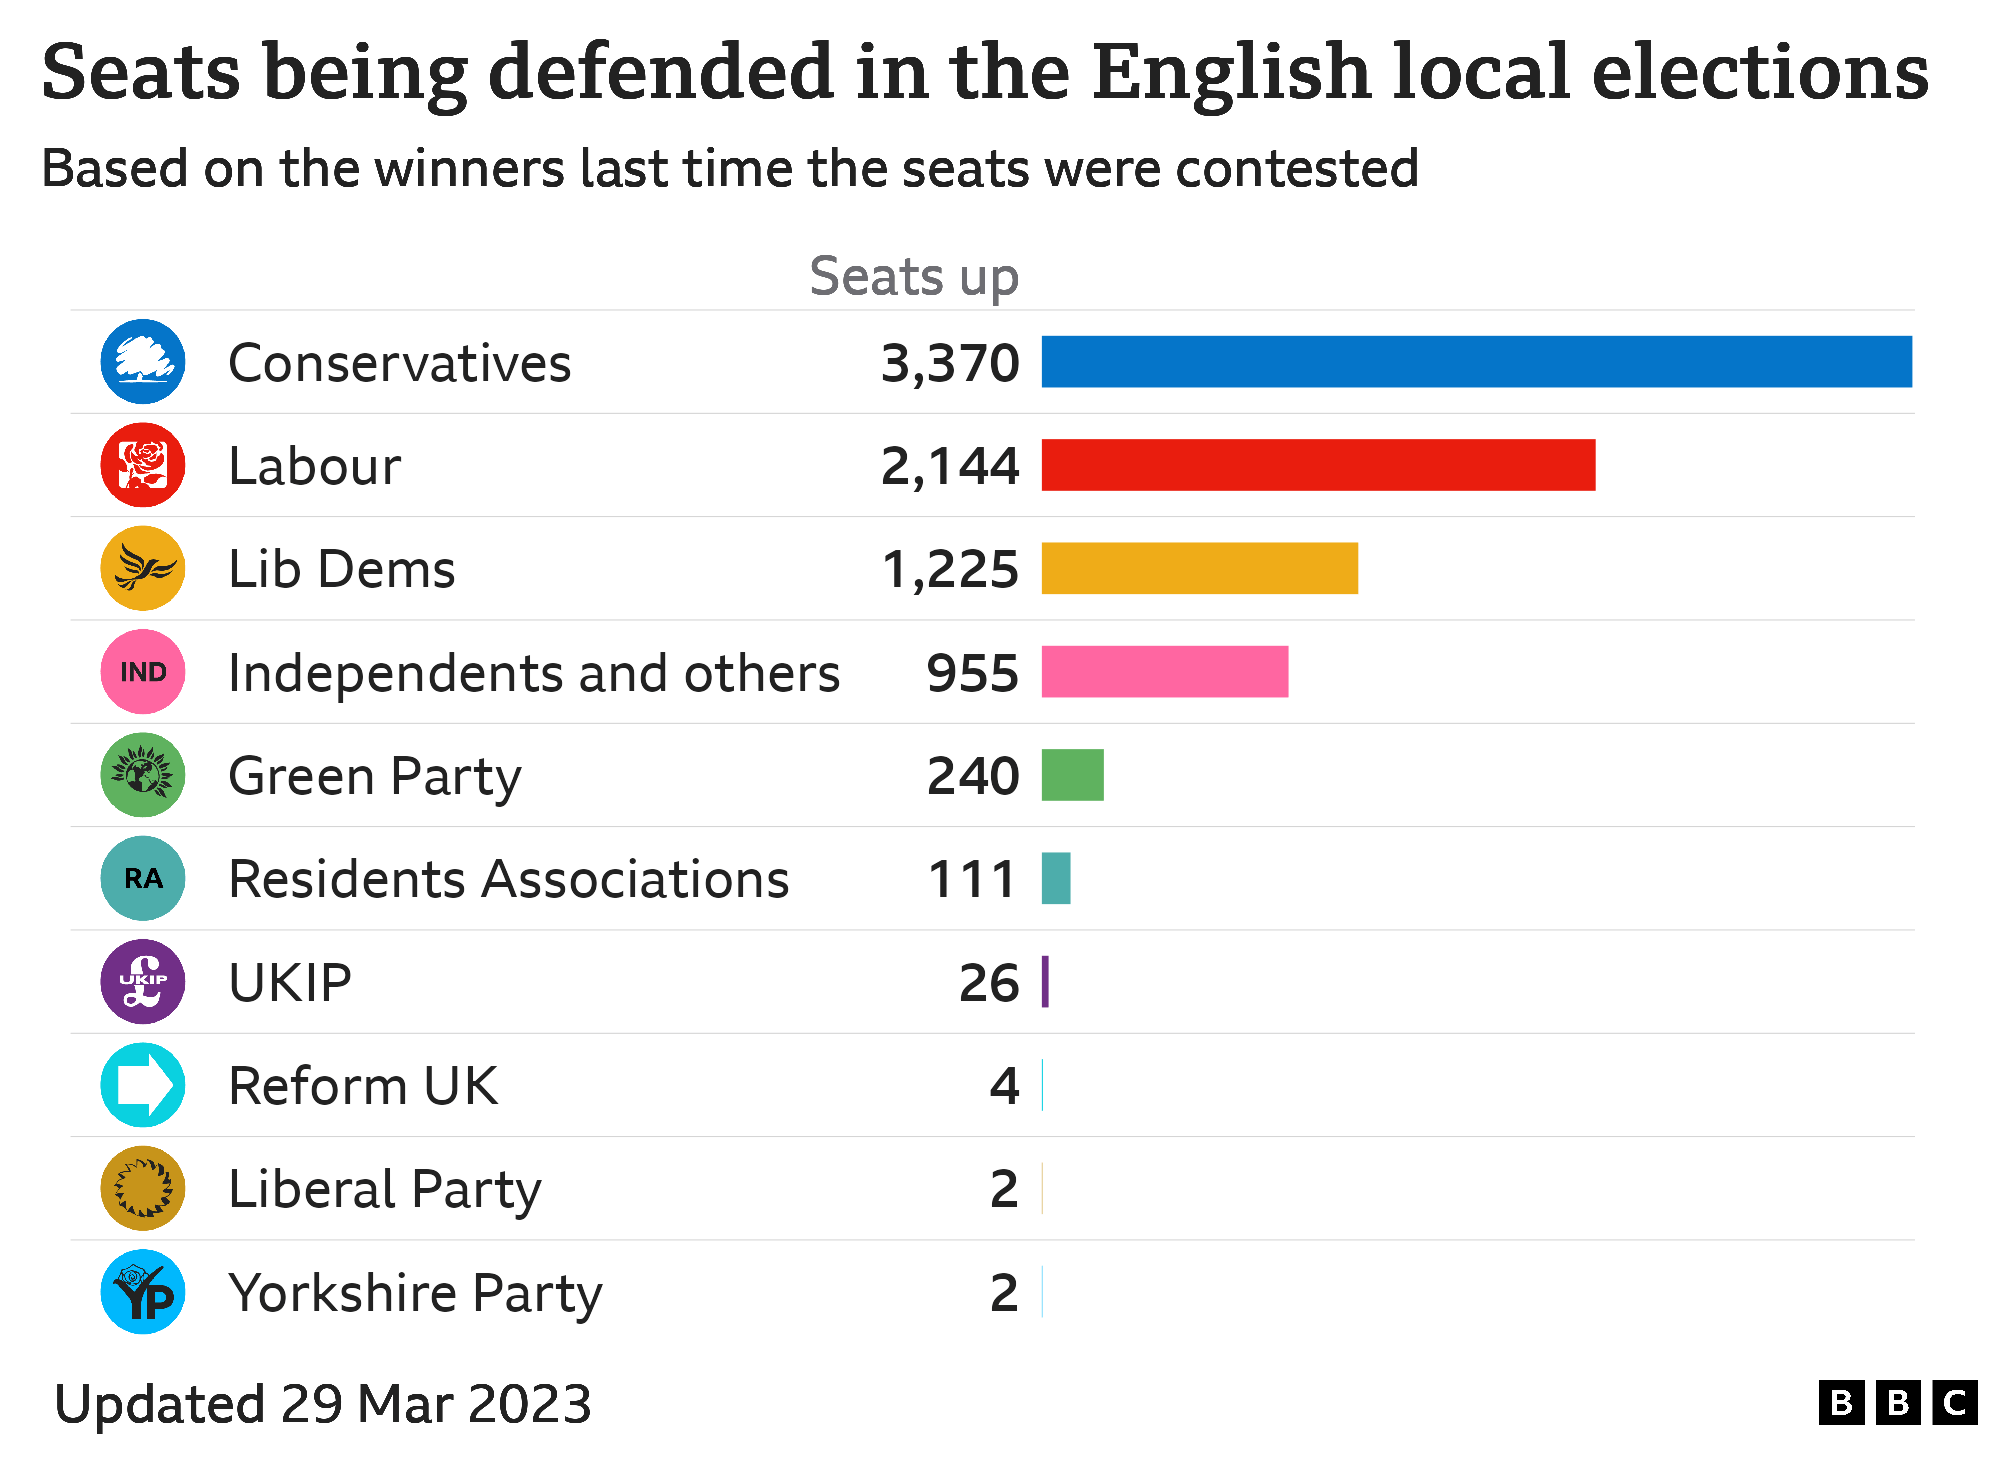 Bar chart showing council seats defended by each party in England, Conservatives 3370, Labour 2144, Lib Dems 1225, Independents and others 955, Green Party 240, Residents Associations 111, UKIP 26, Reform UK 4, Liberal Party 2, Yorkshire Party 2